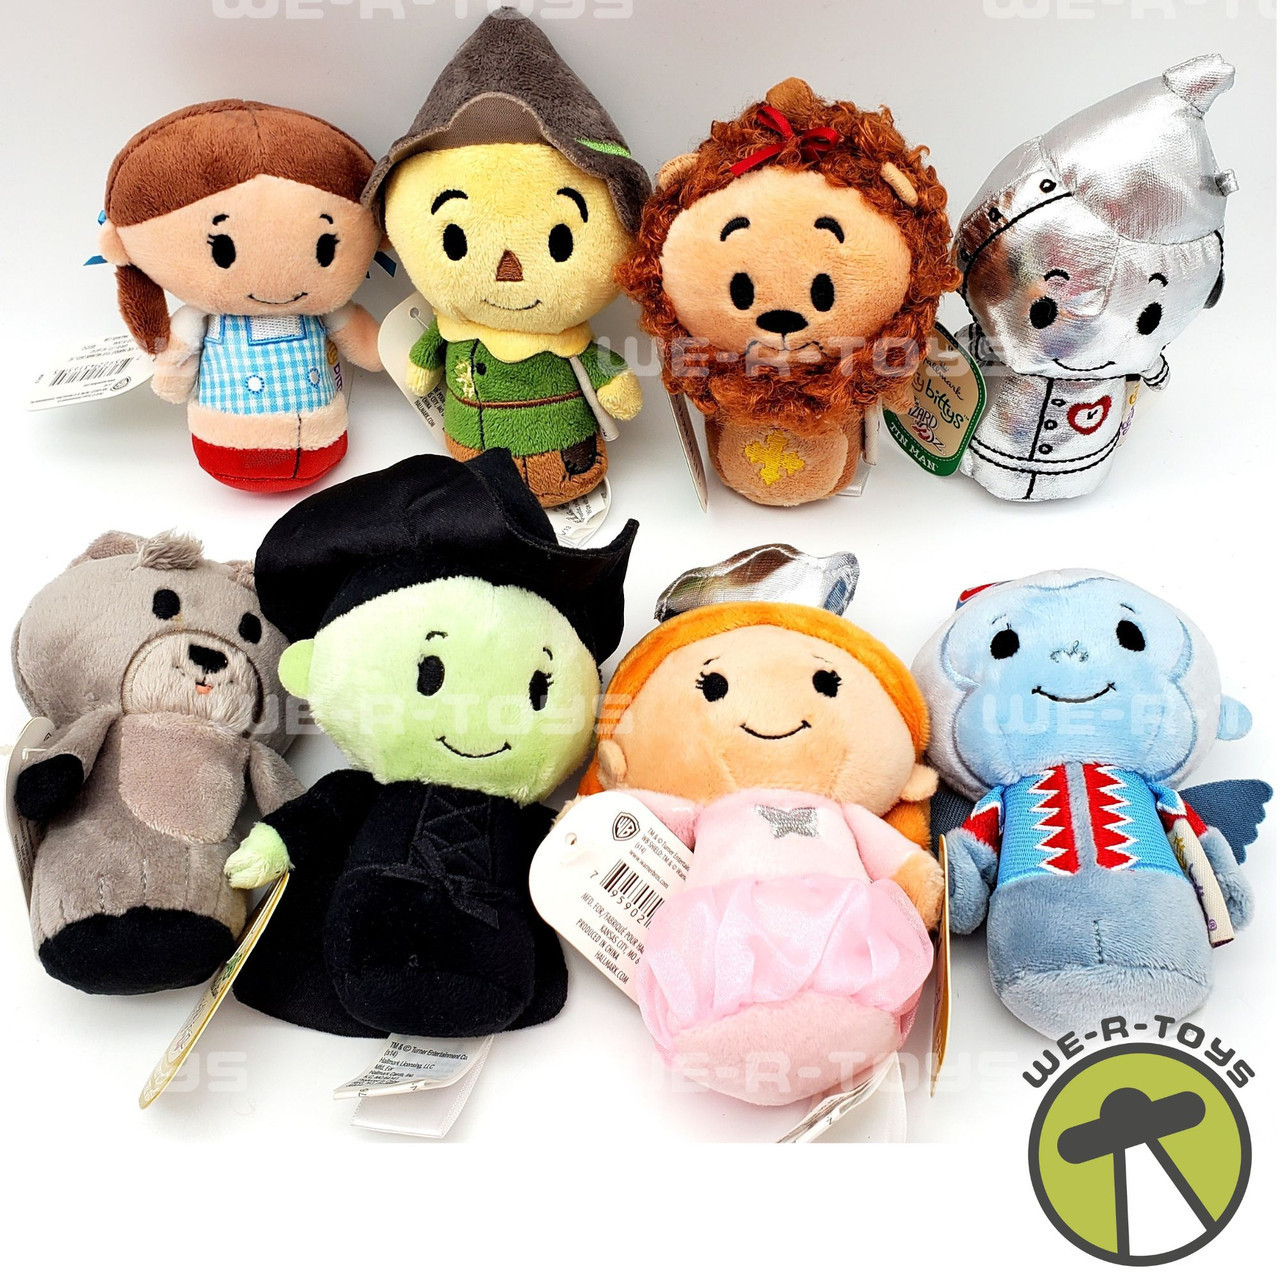 Wizard of Oz Itty Bitty Plush Figures Set of 8 Limited Edition Hallmark NWT  - We-R-Toys